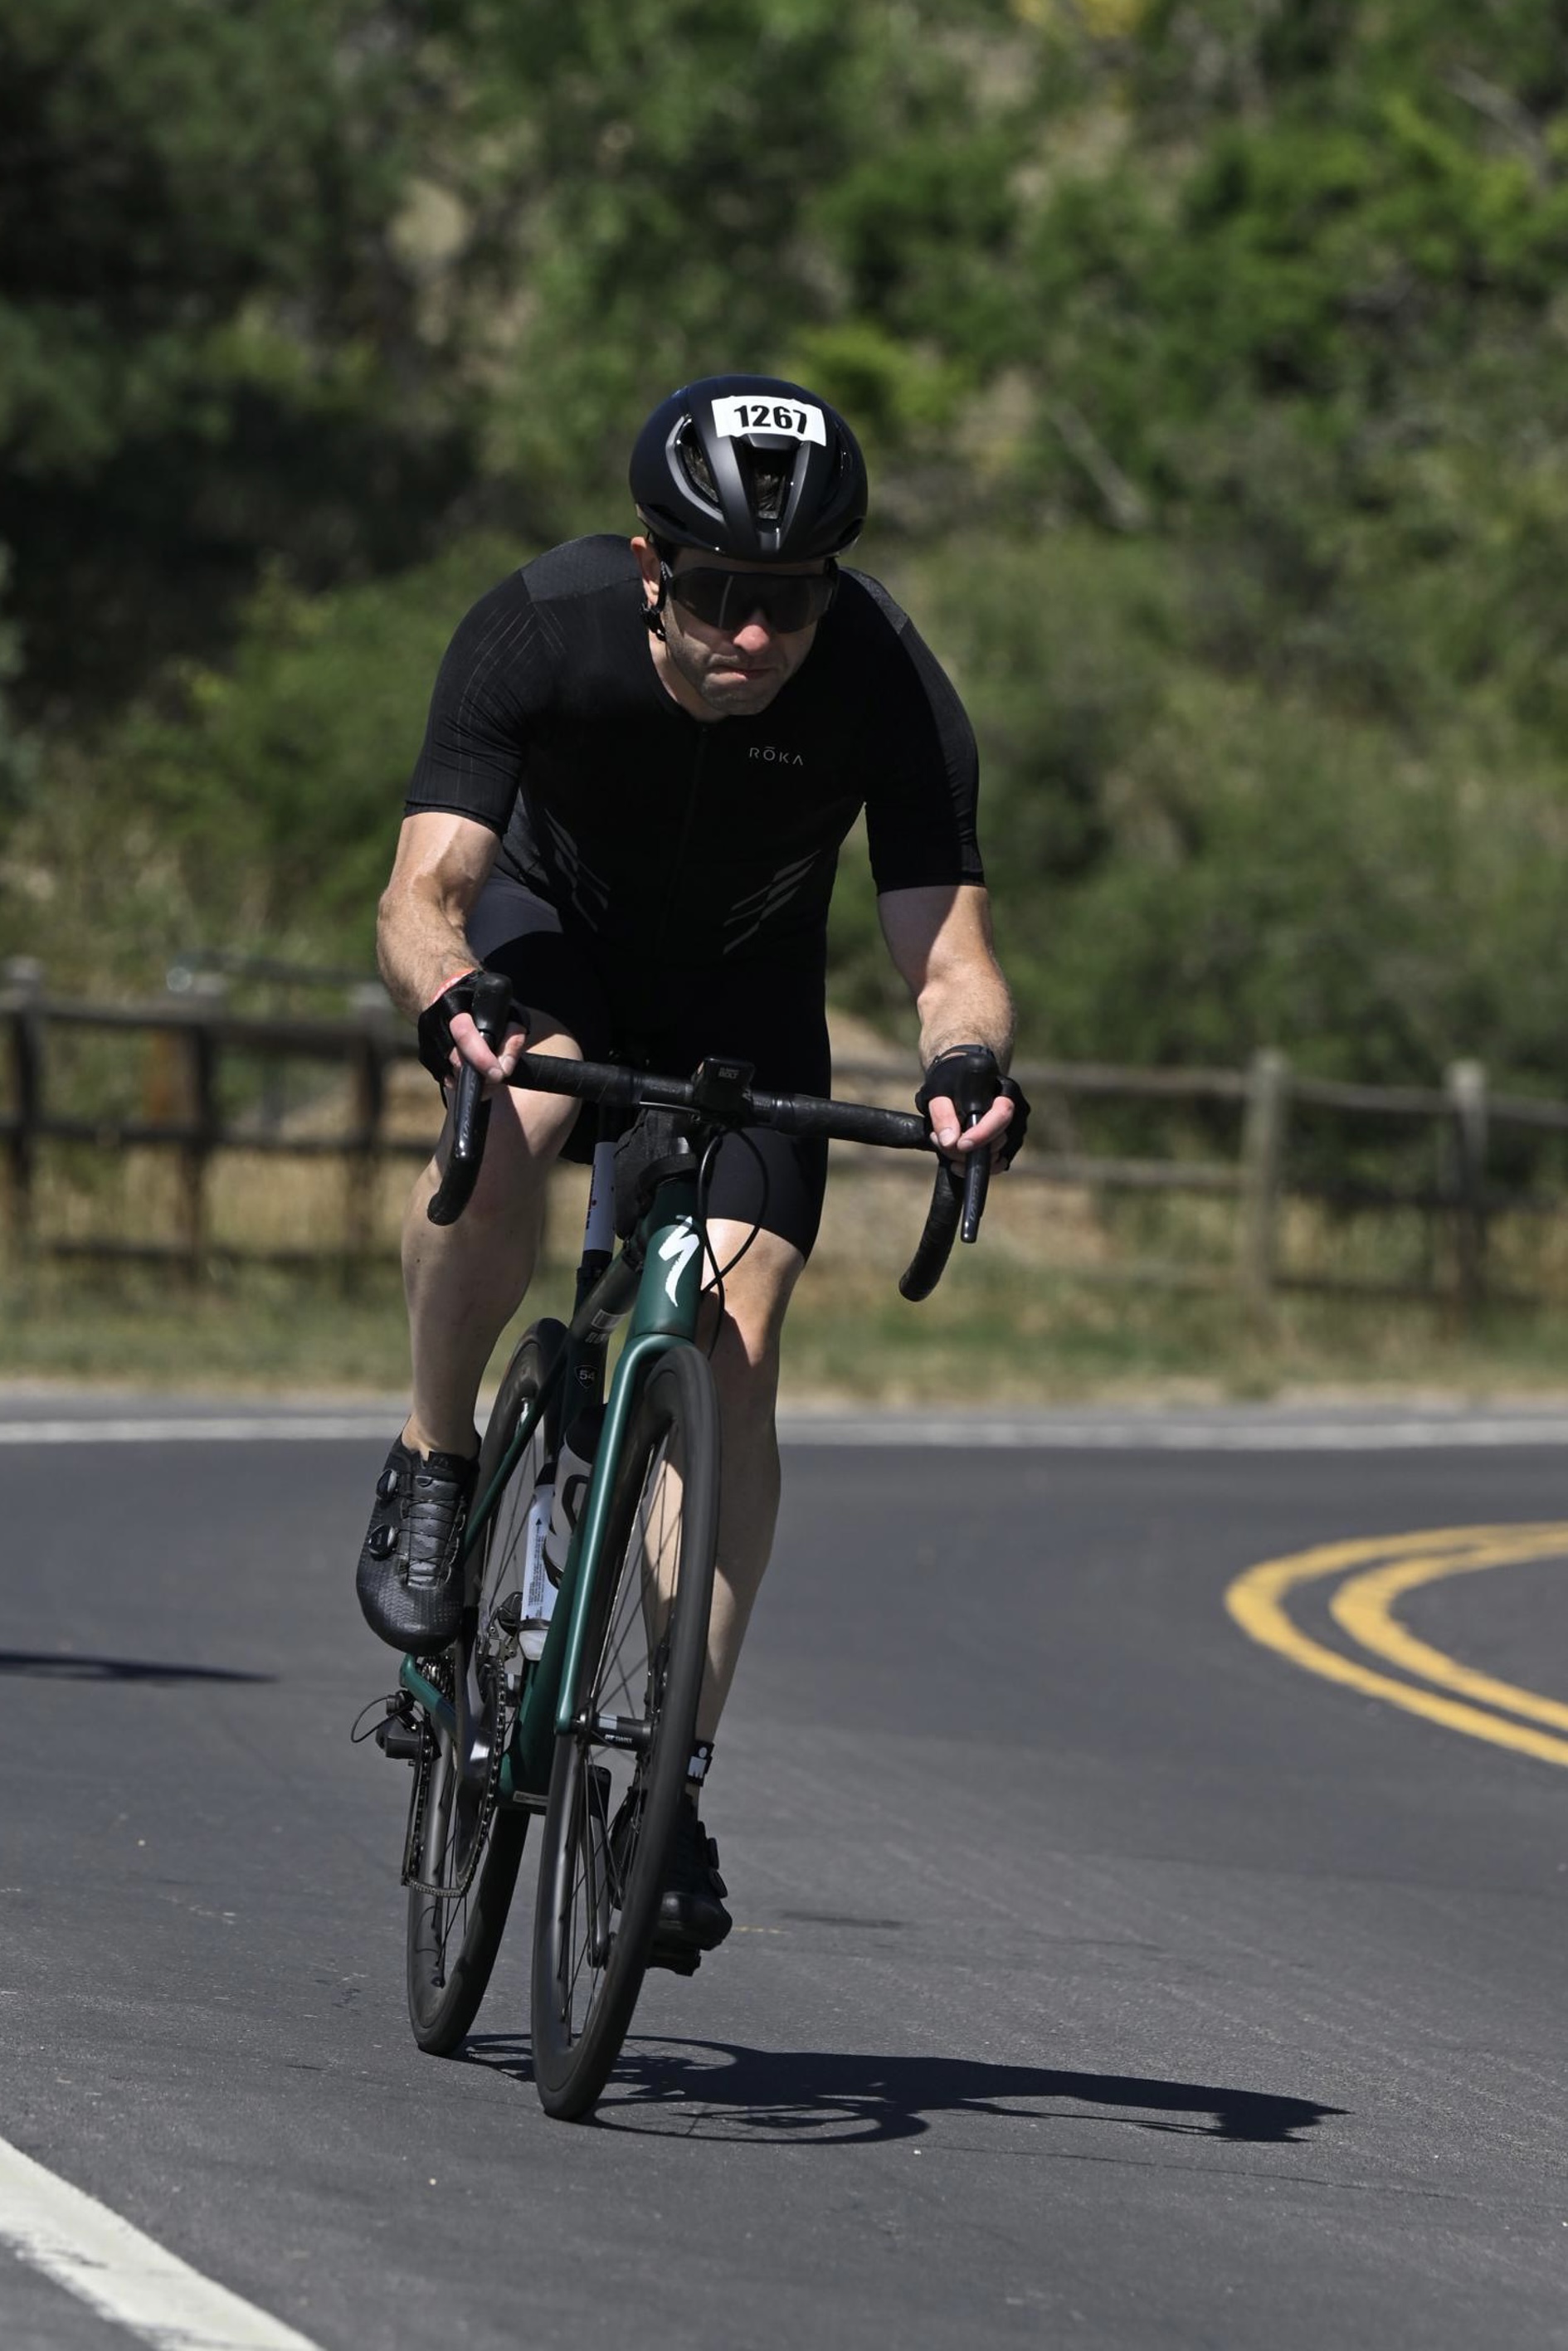 Me, riding a green Specialized Aethos bike on a country road. I'm wearing a black Roka tri suit, black gloves, dark sunglasses, and a black helmet with the number 1267 on it.